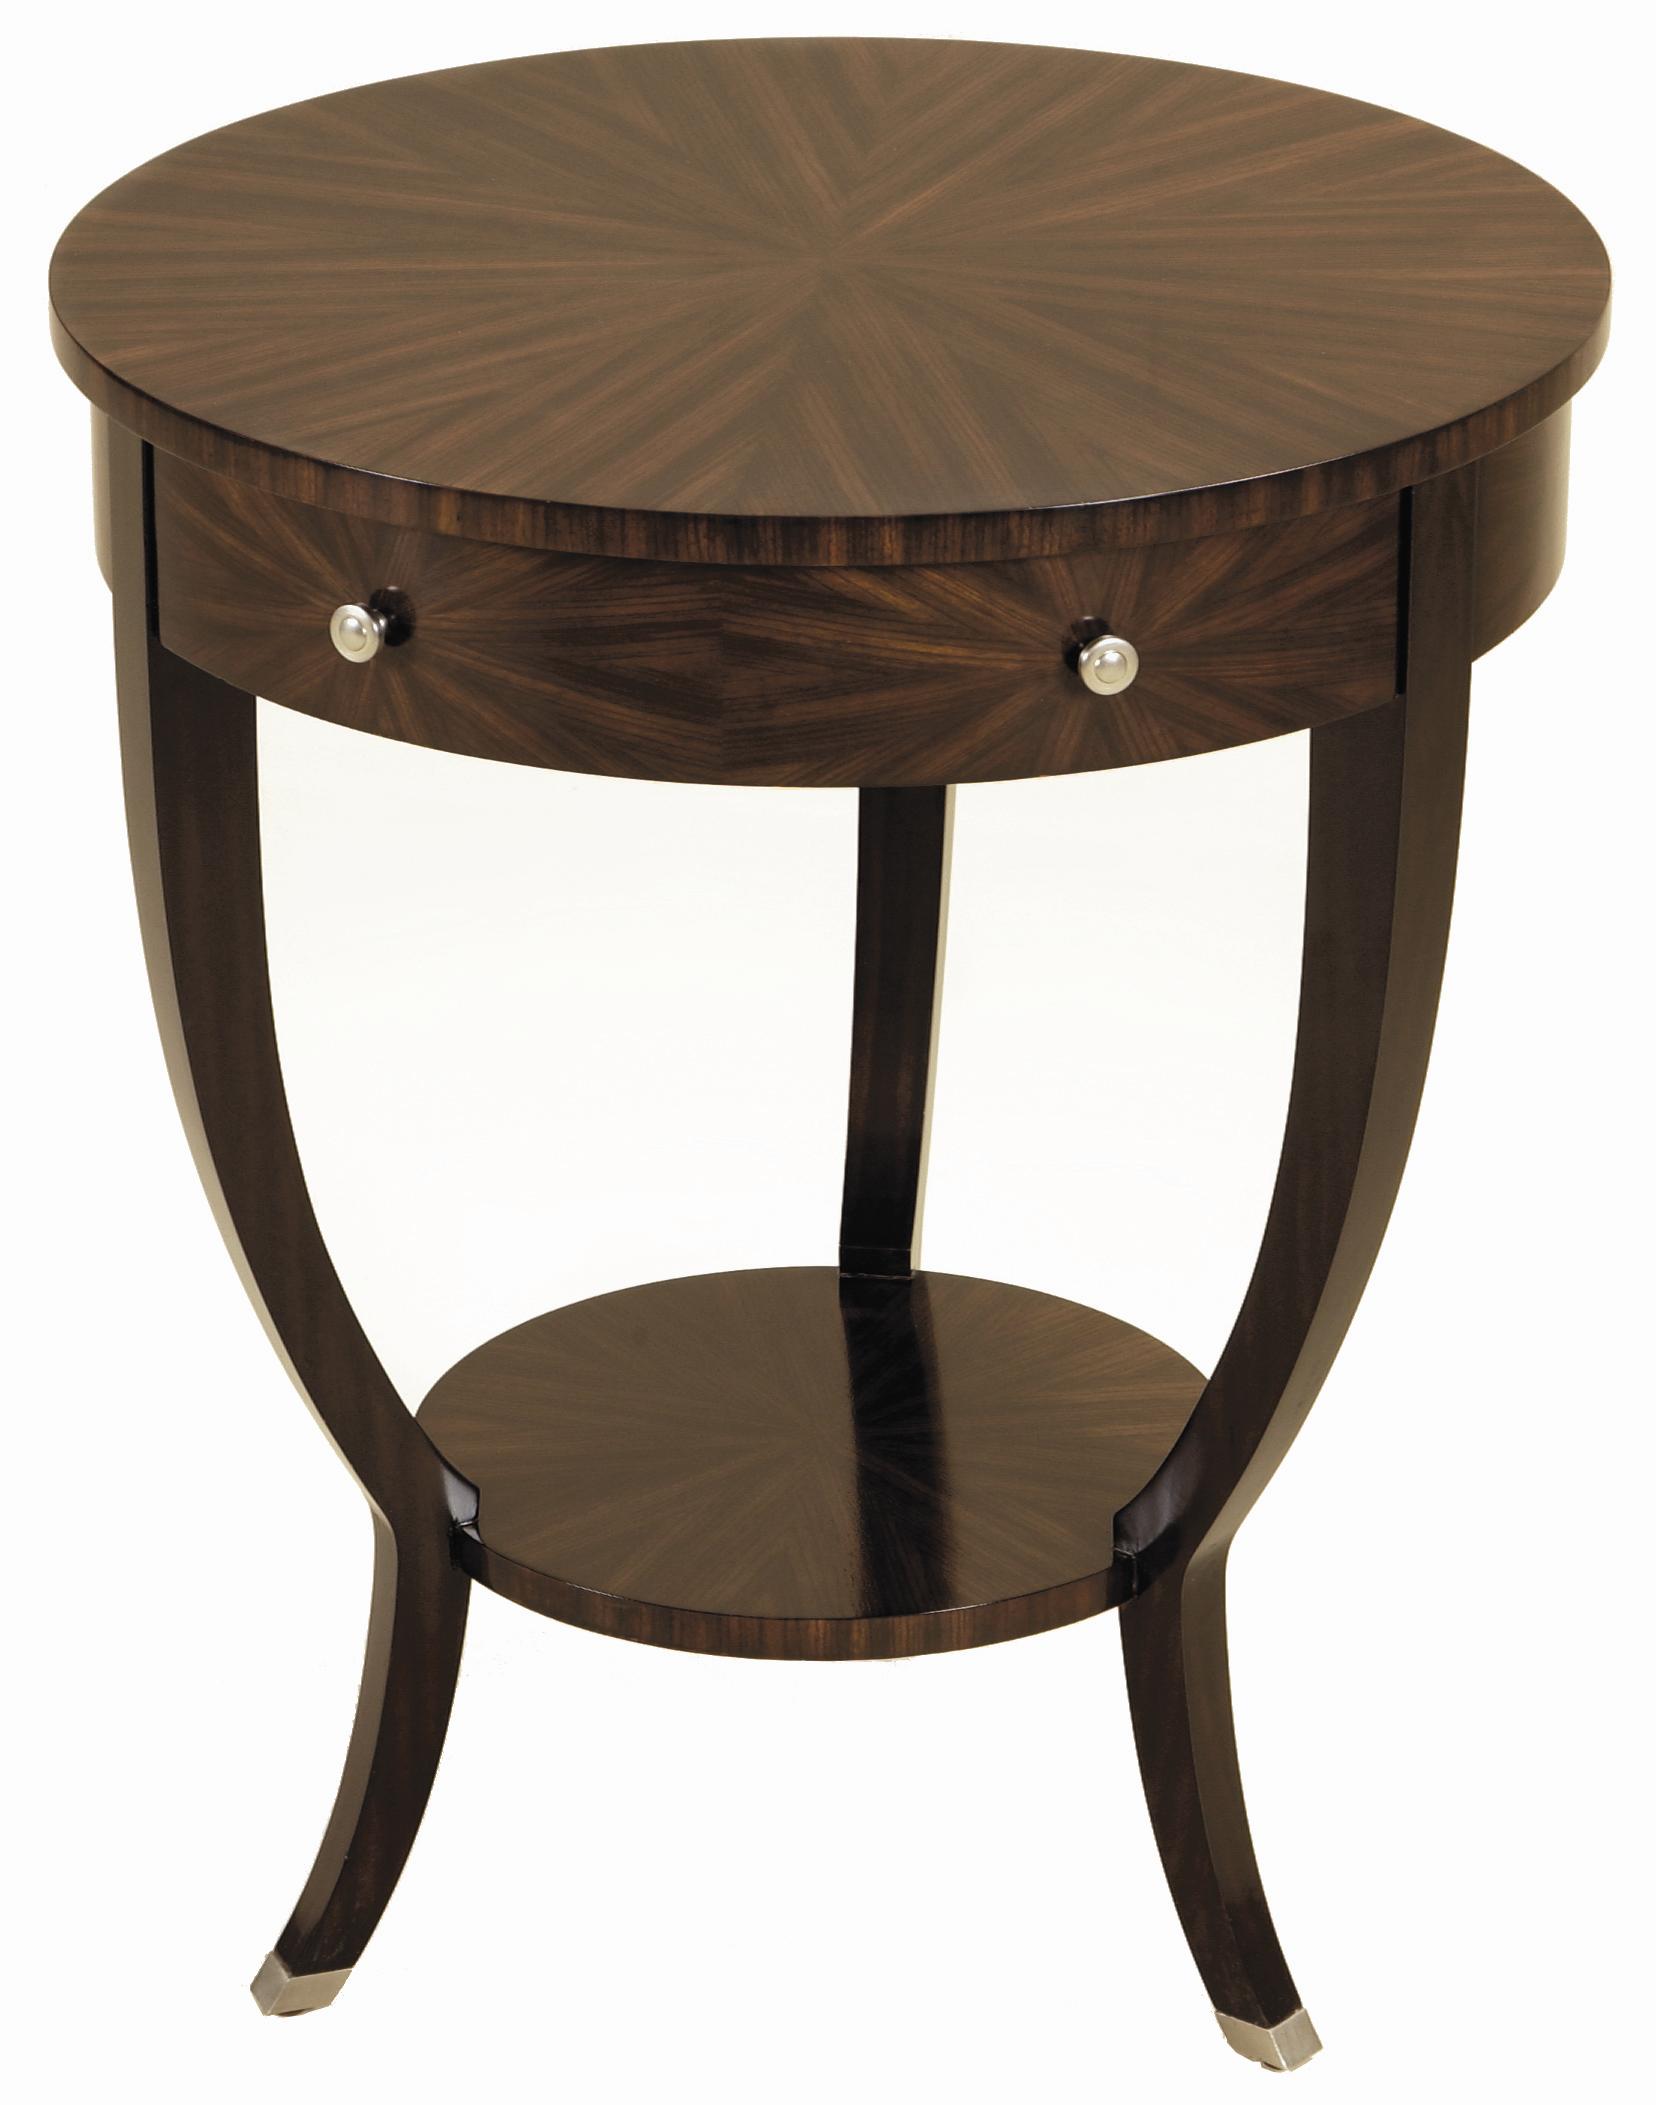 Ebony Finished Zebrano Veneer Round Occasional Table with Brushed Satina Brass Accents